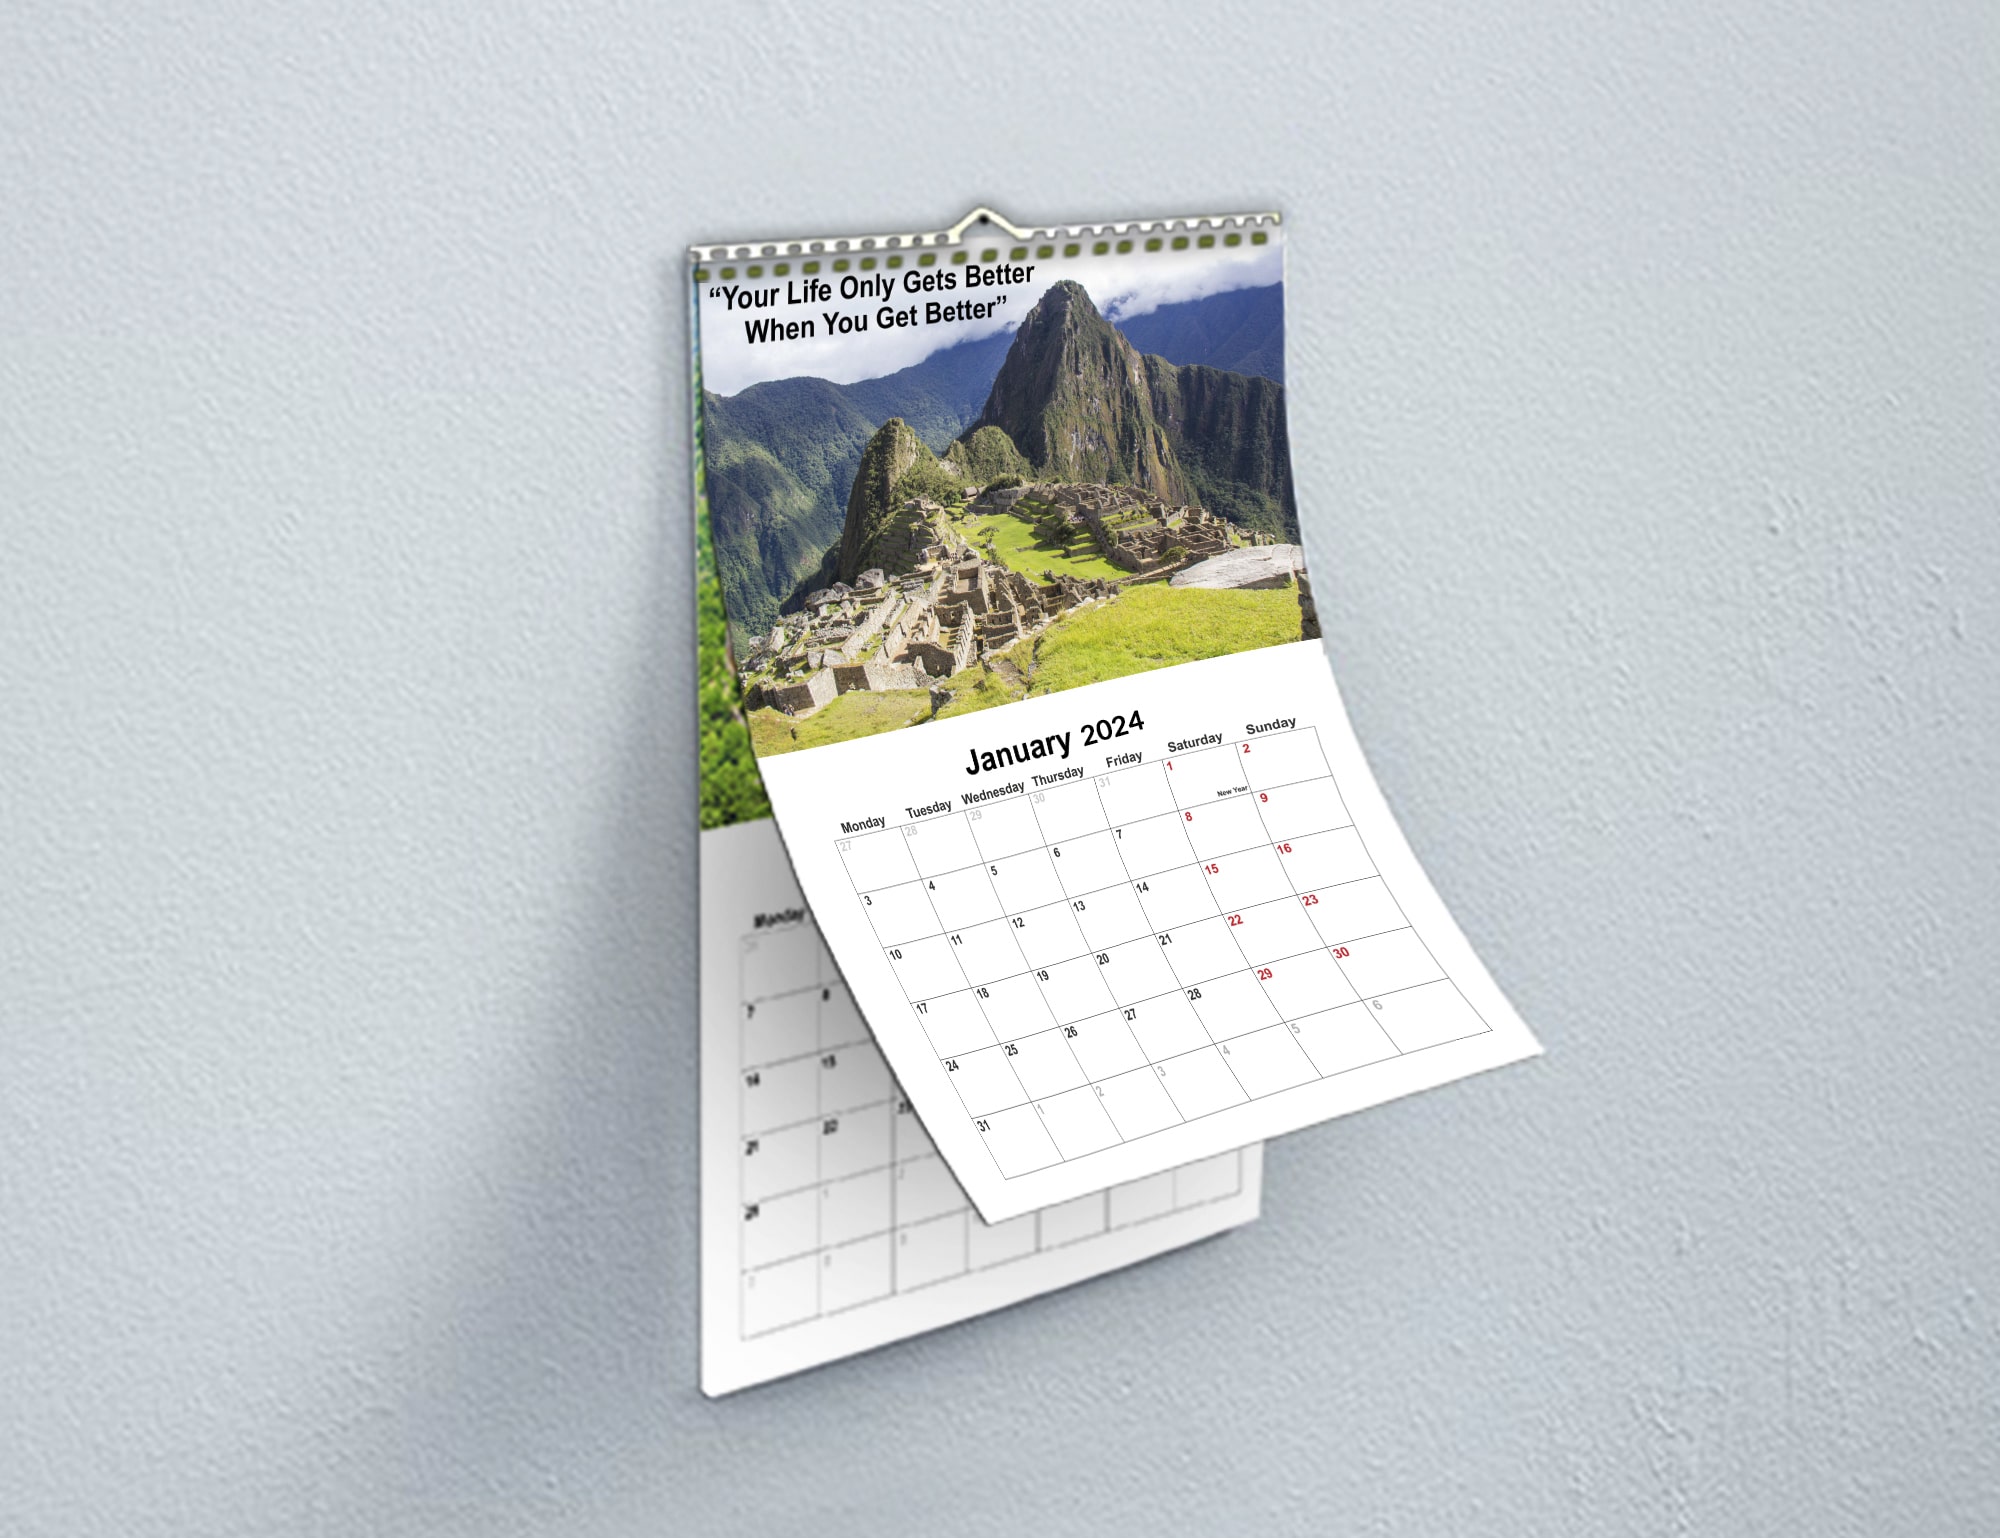 A calendar on a wall with a majestic mountain in the background.